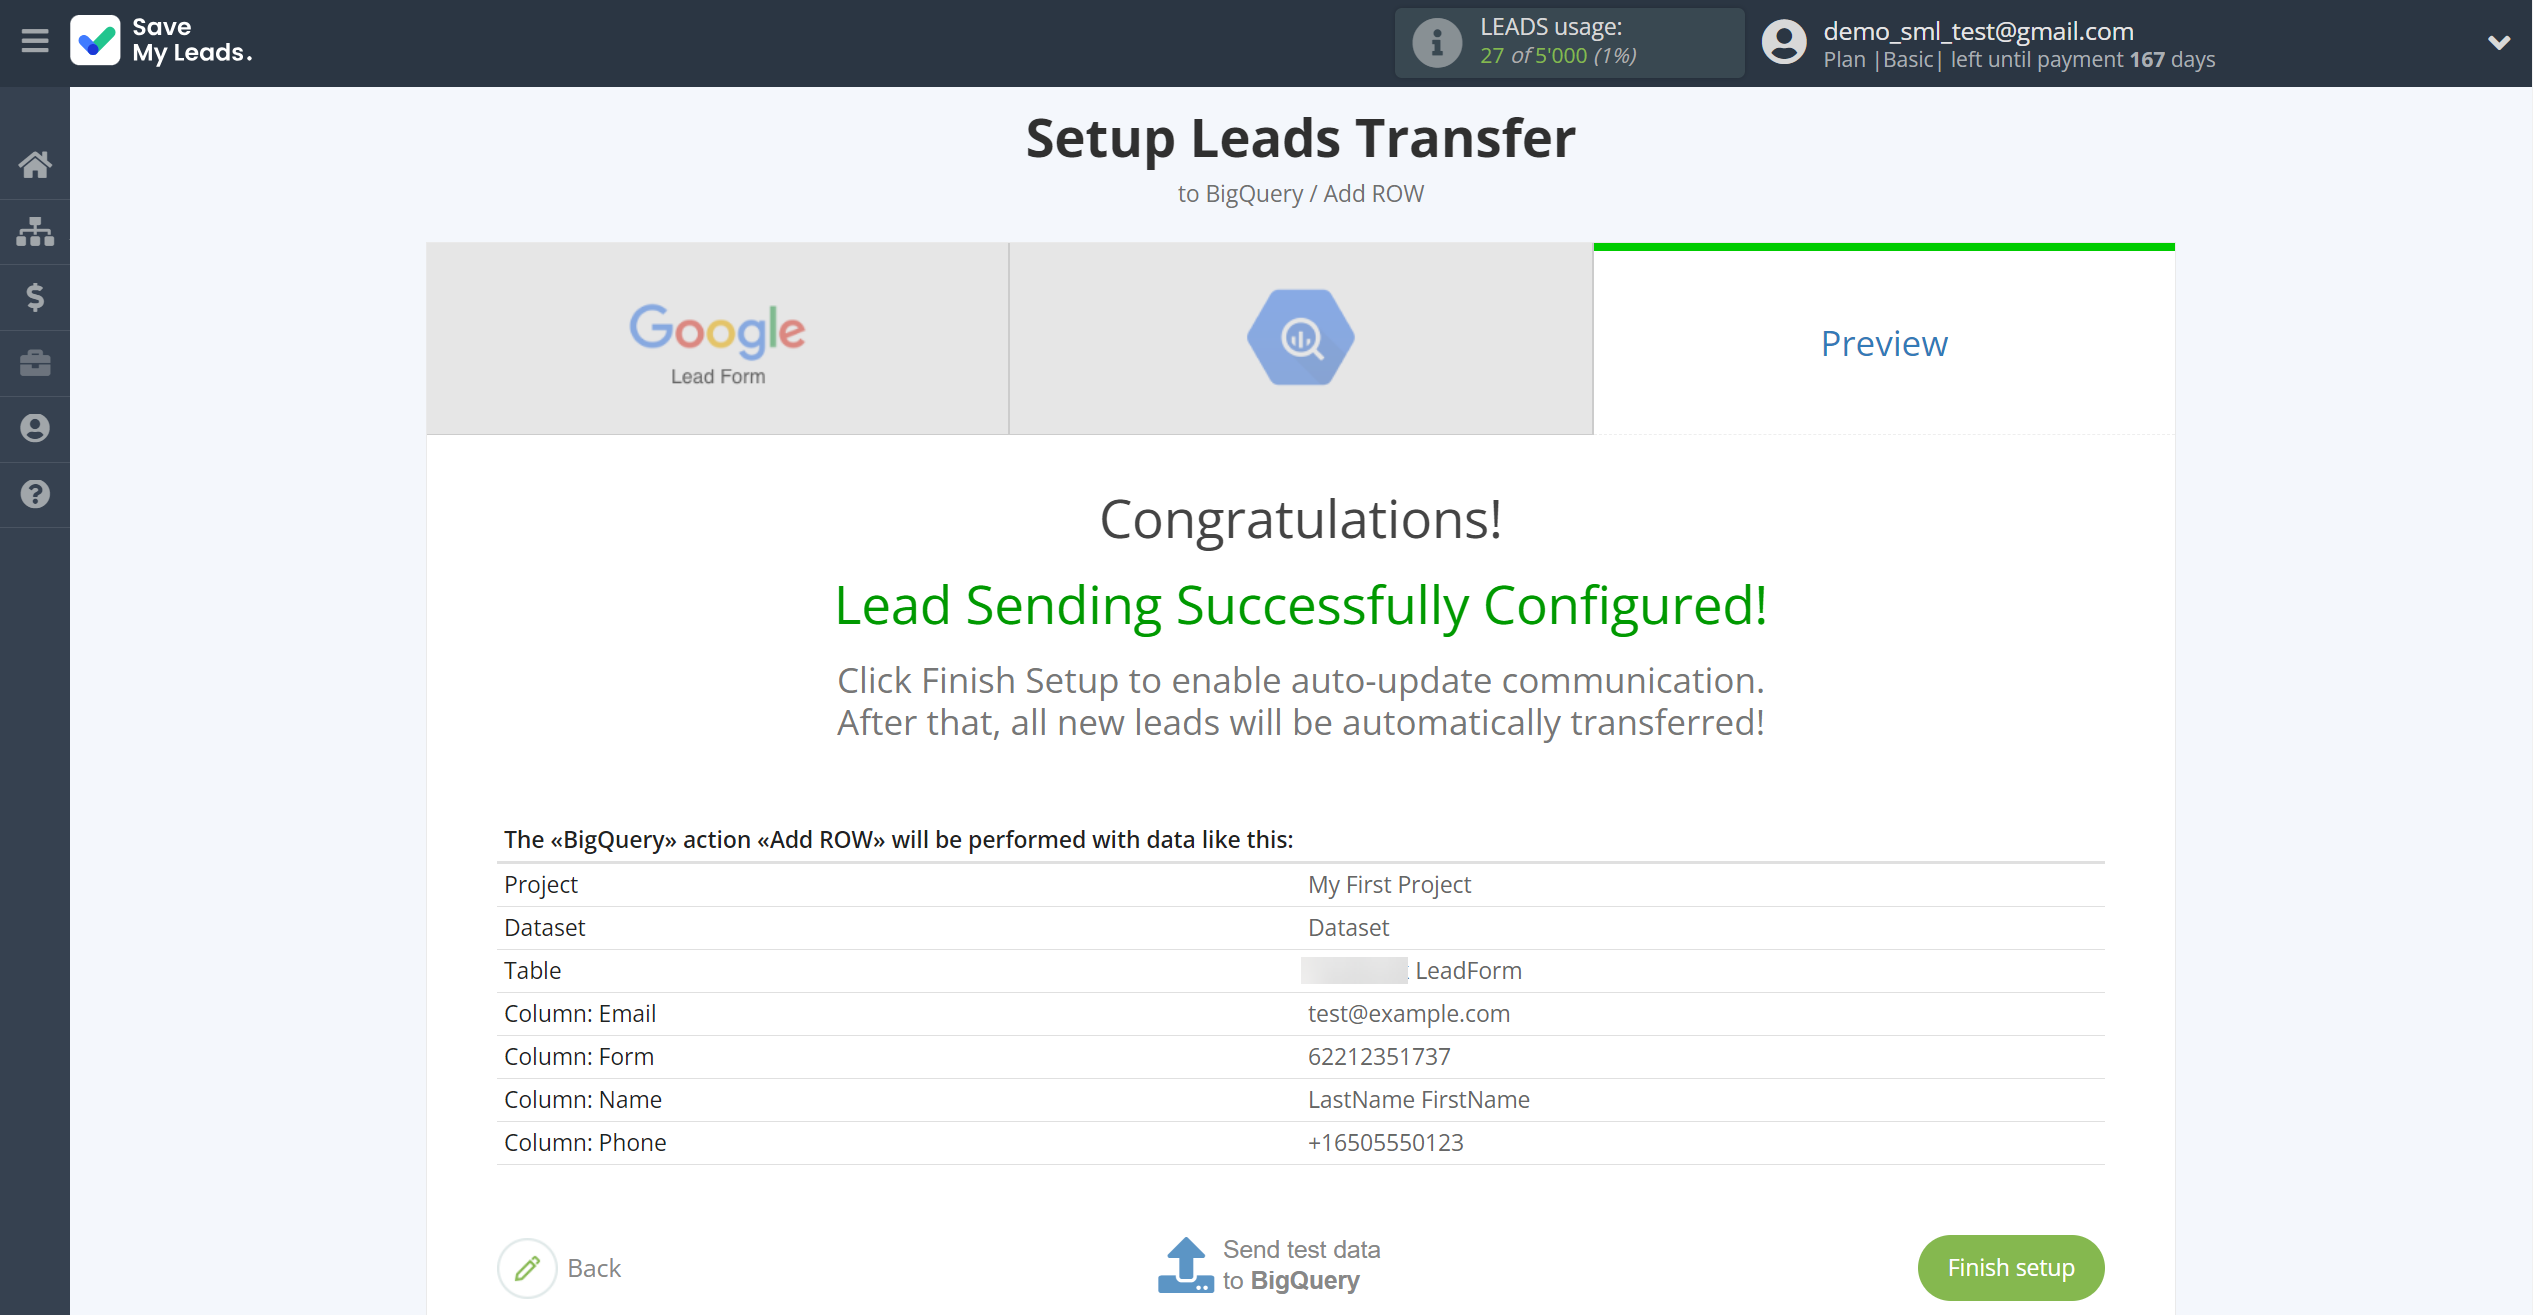 How to Connect Google Lead Form with BigQuery | Test data